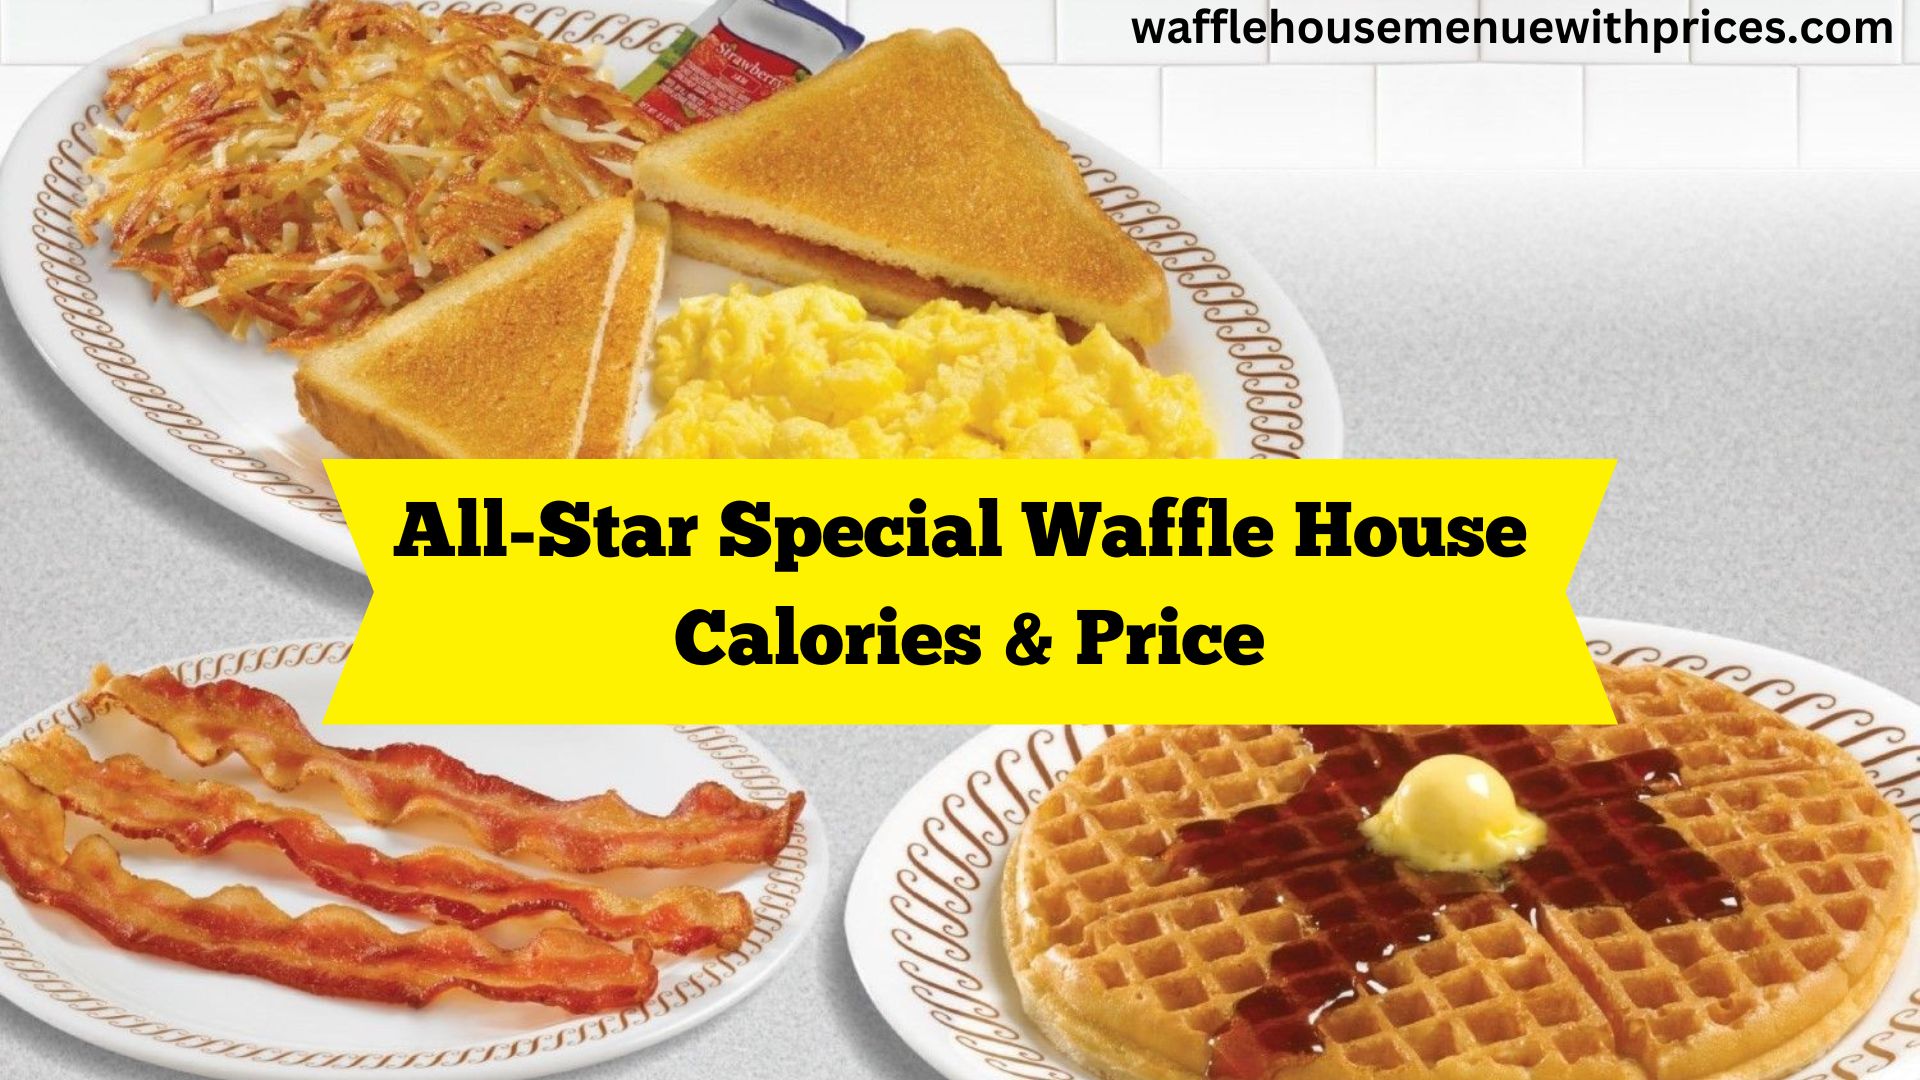 All-Star Special Waffle House Calories